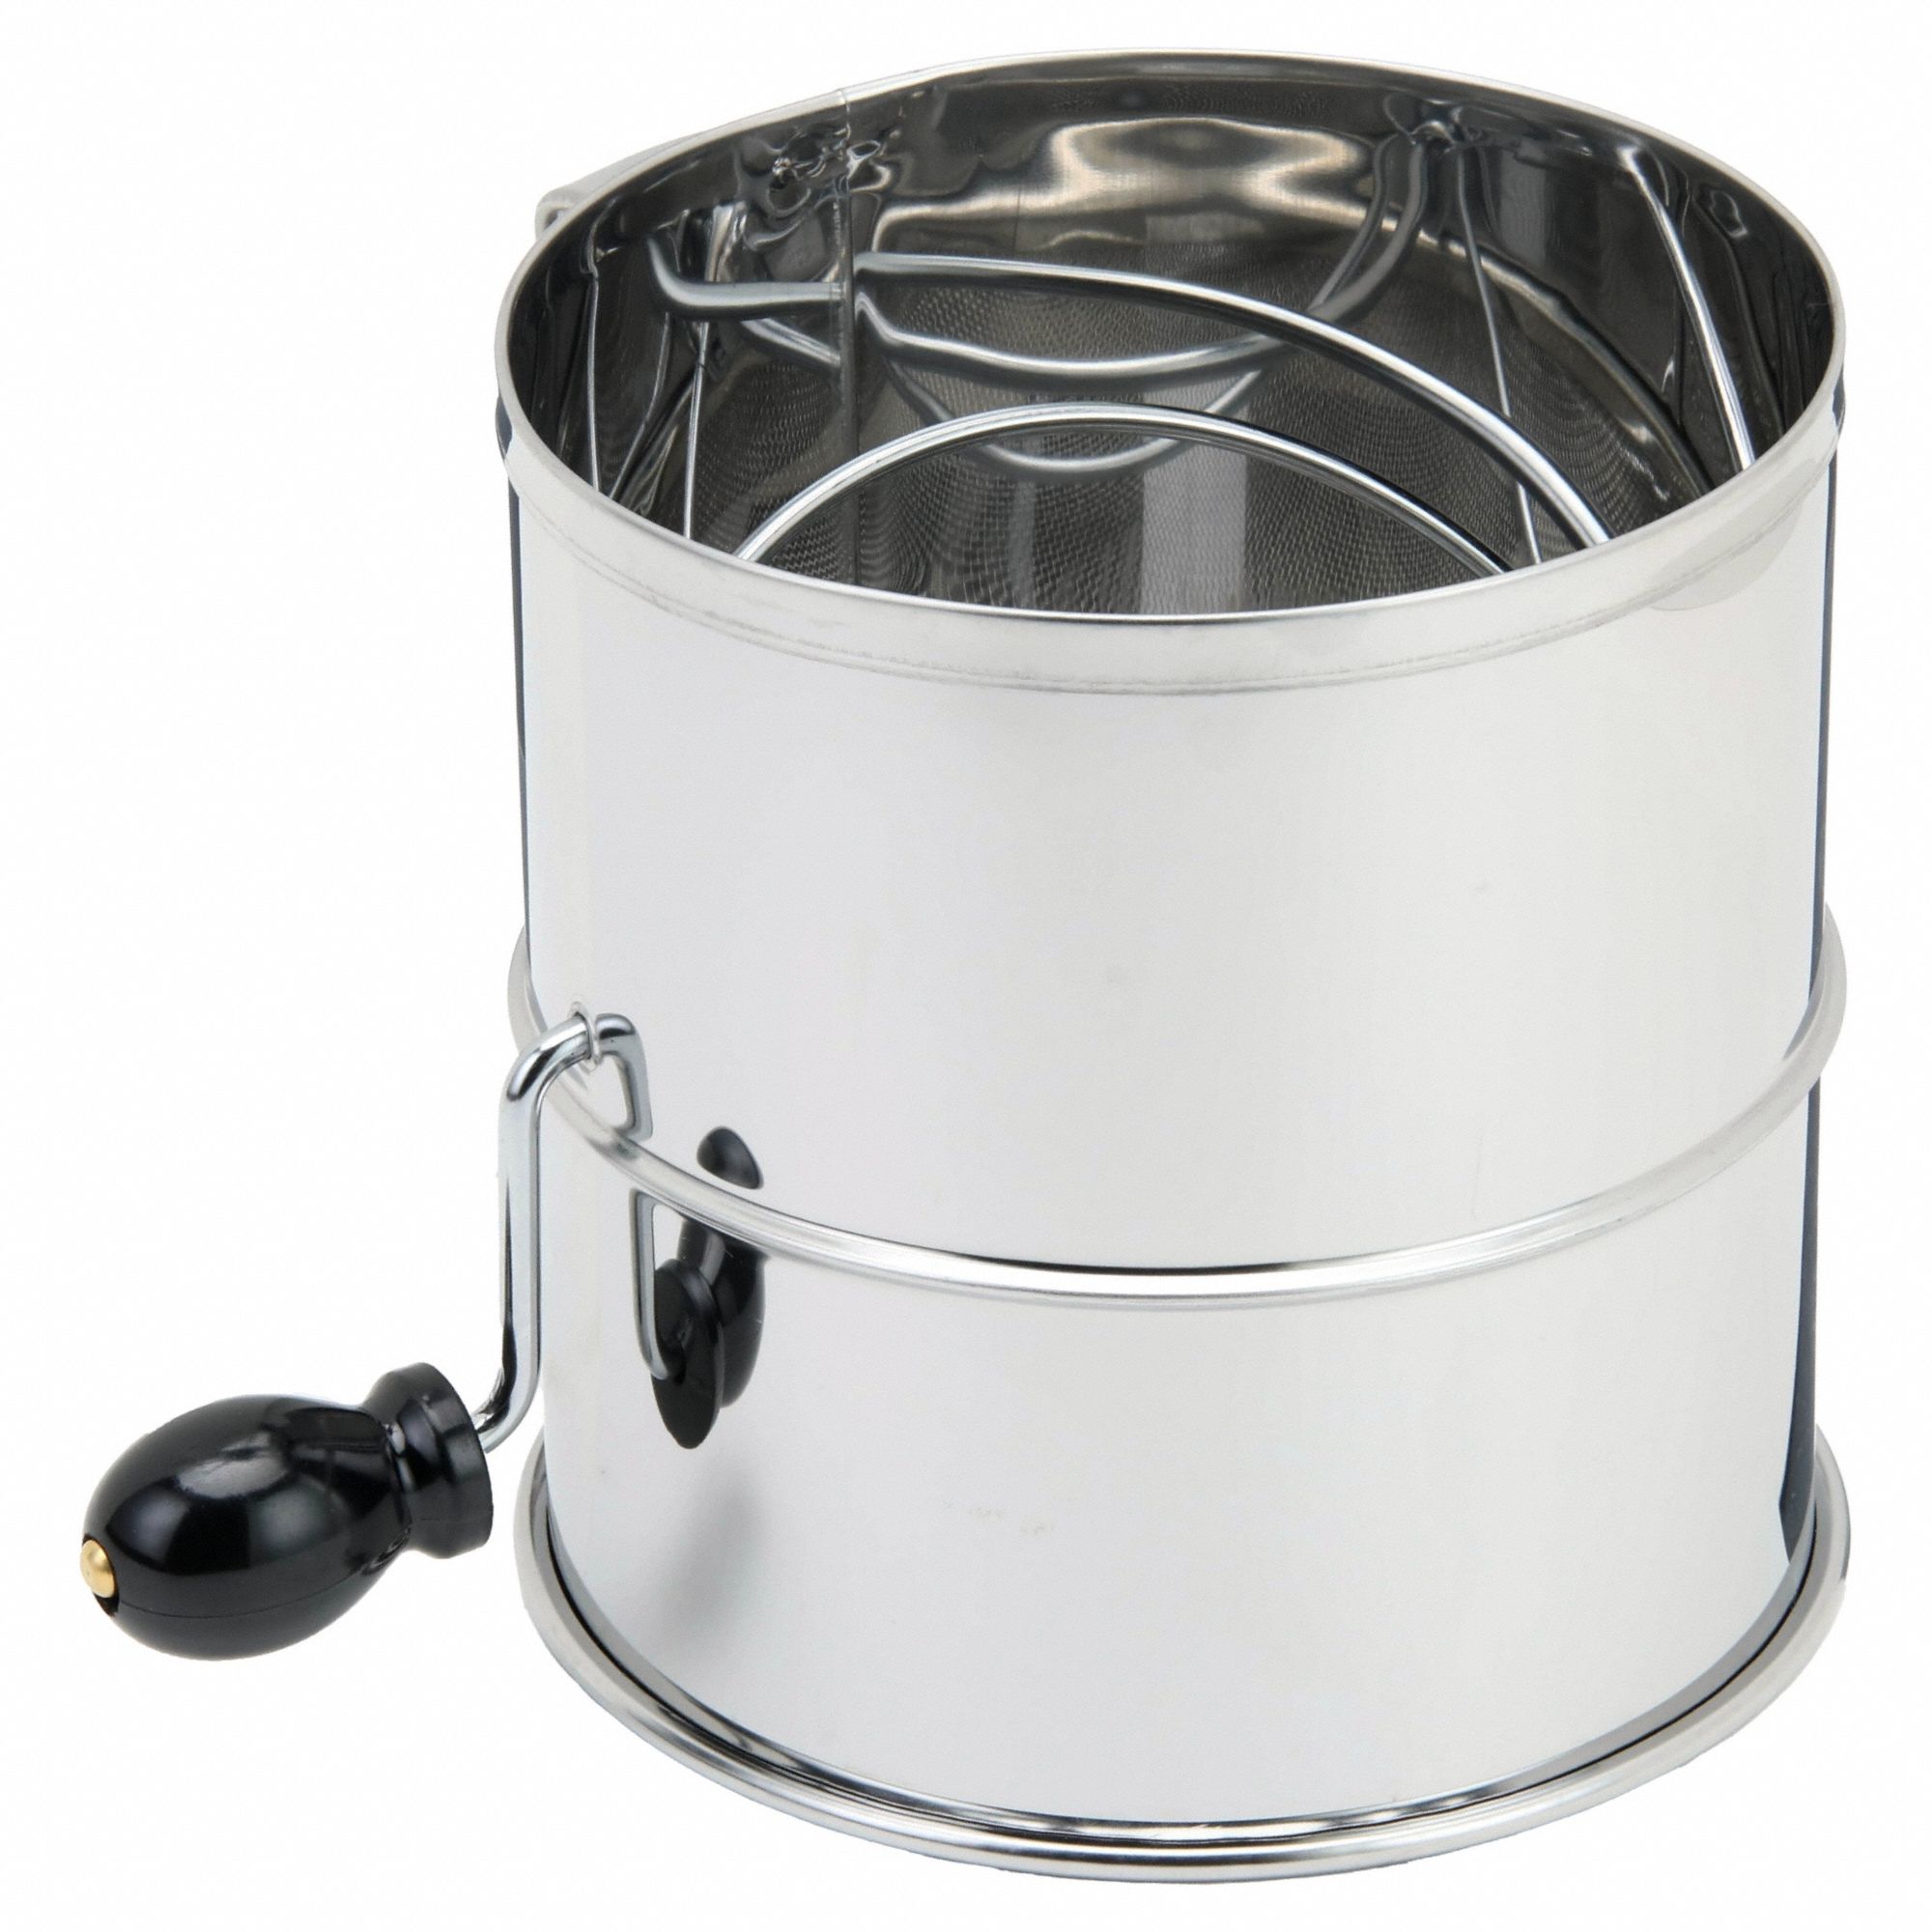 Battery Operated Battery Operated Flour Sifter Baking Sifter 4 Cup